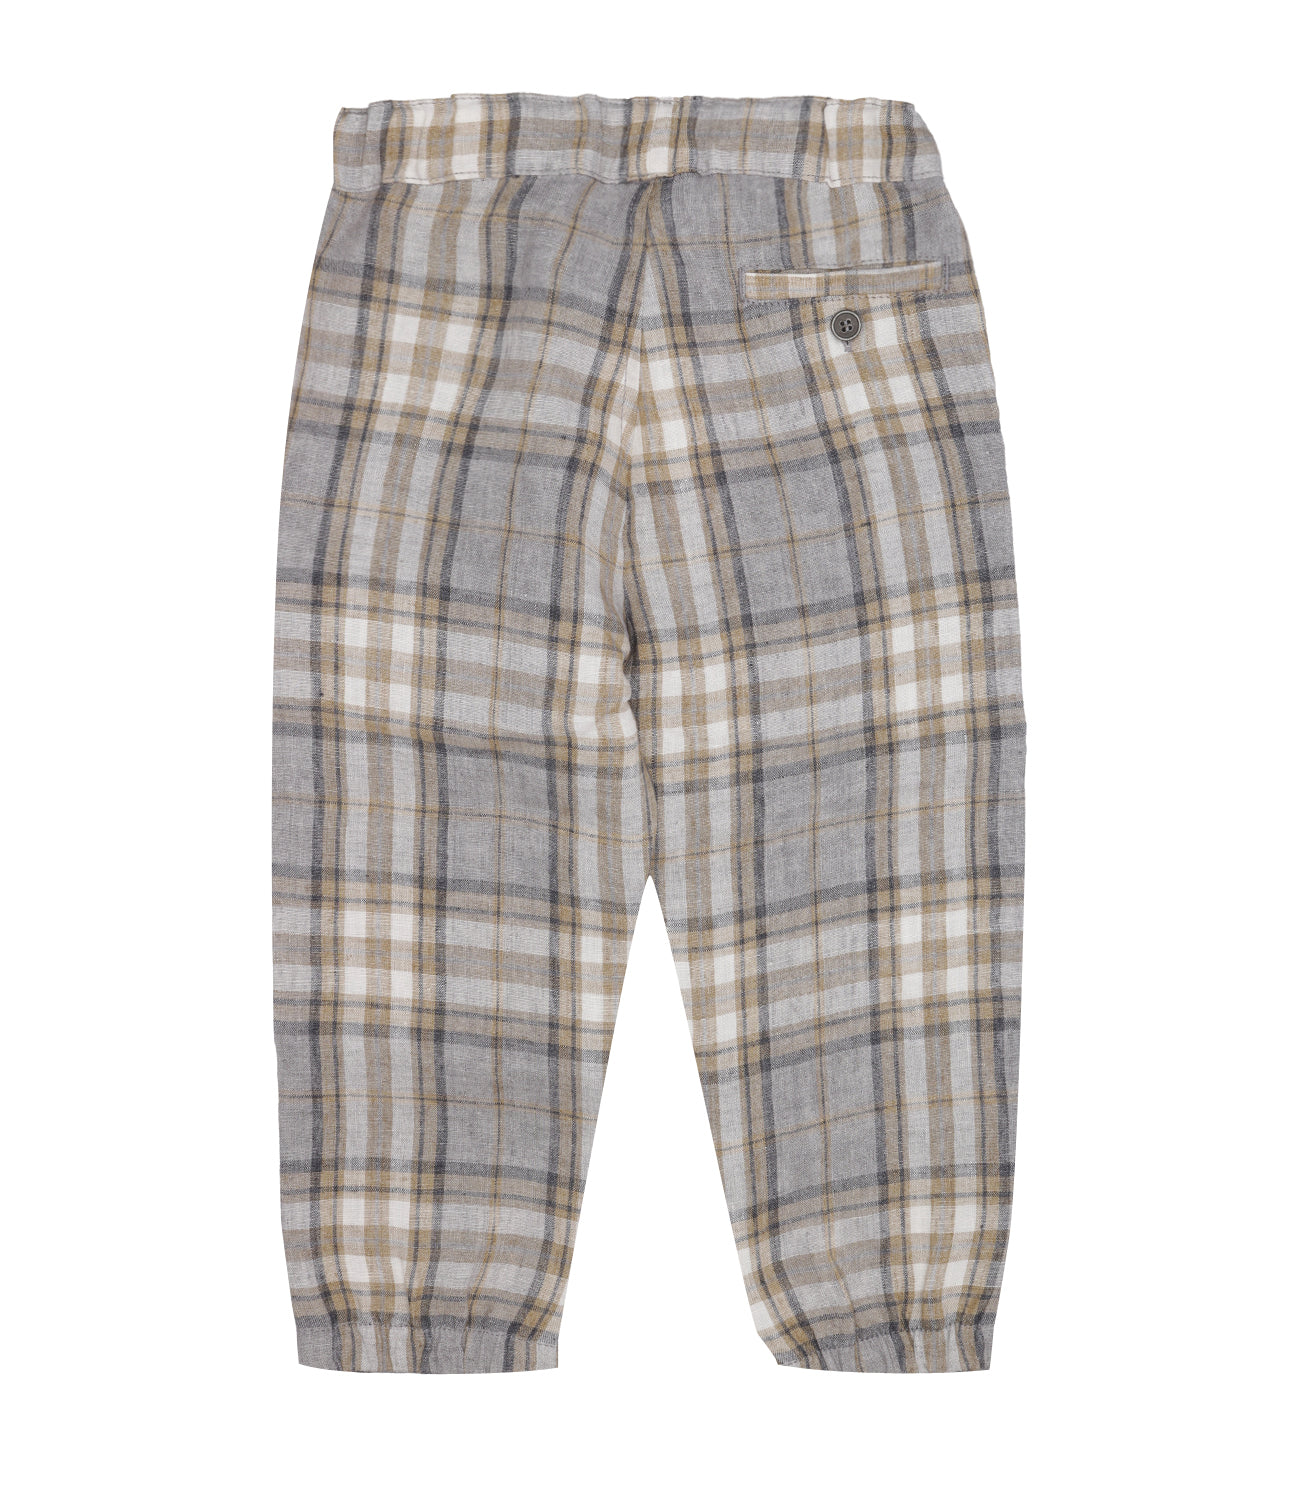 The Owl | Gray and Rope Pants